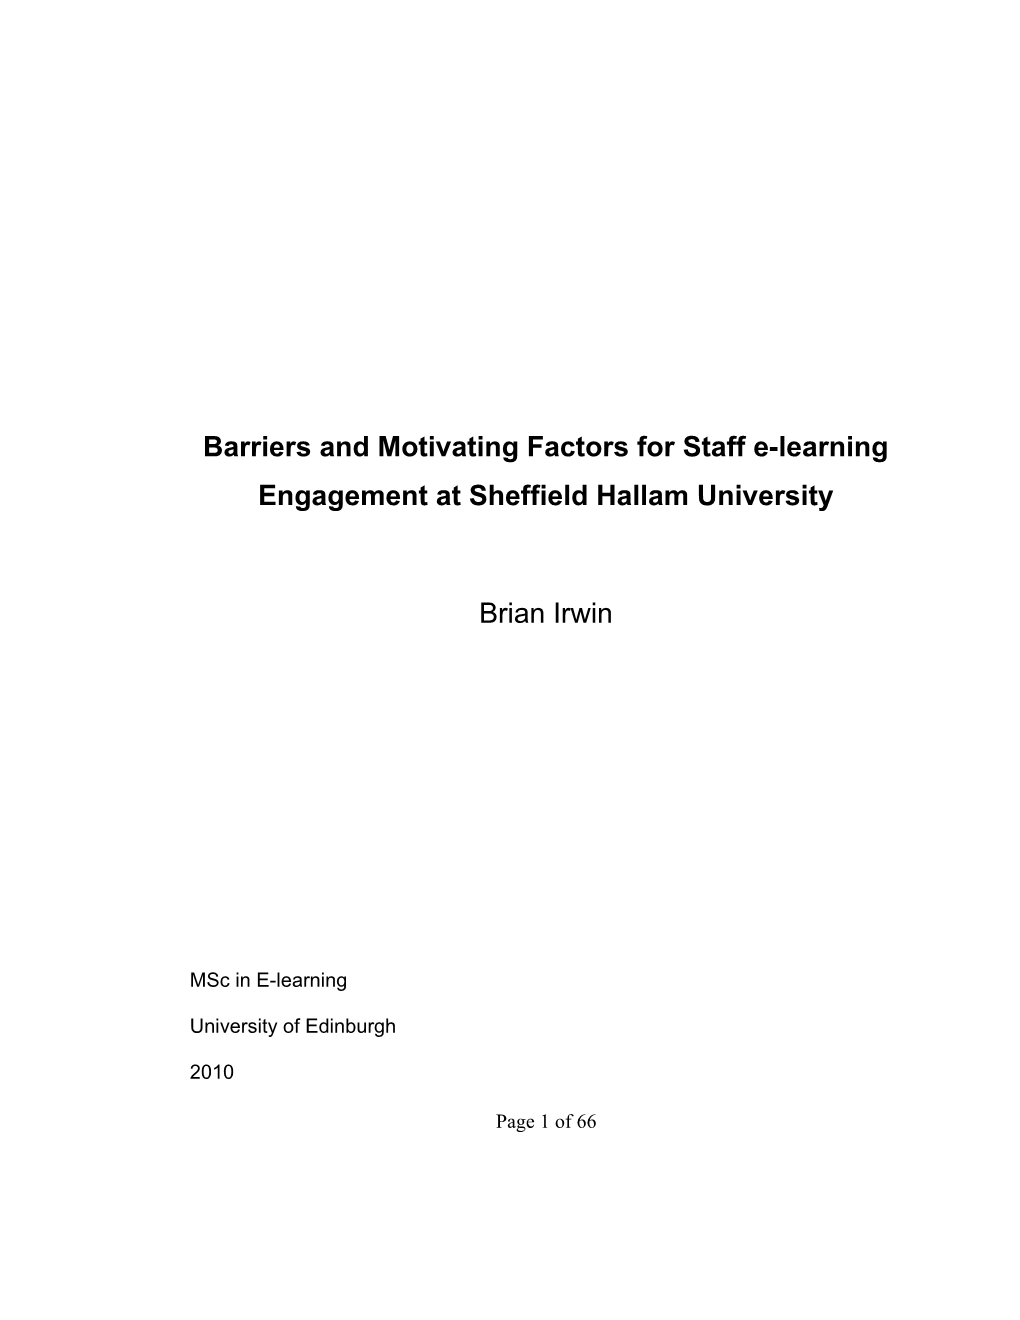 Barriers and Motivating Factors for Staff E-Learning Engagement at Sheffield Hallam University